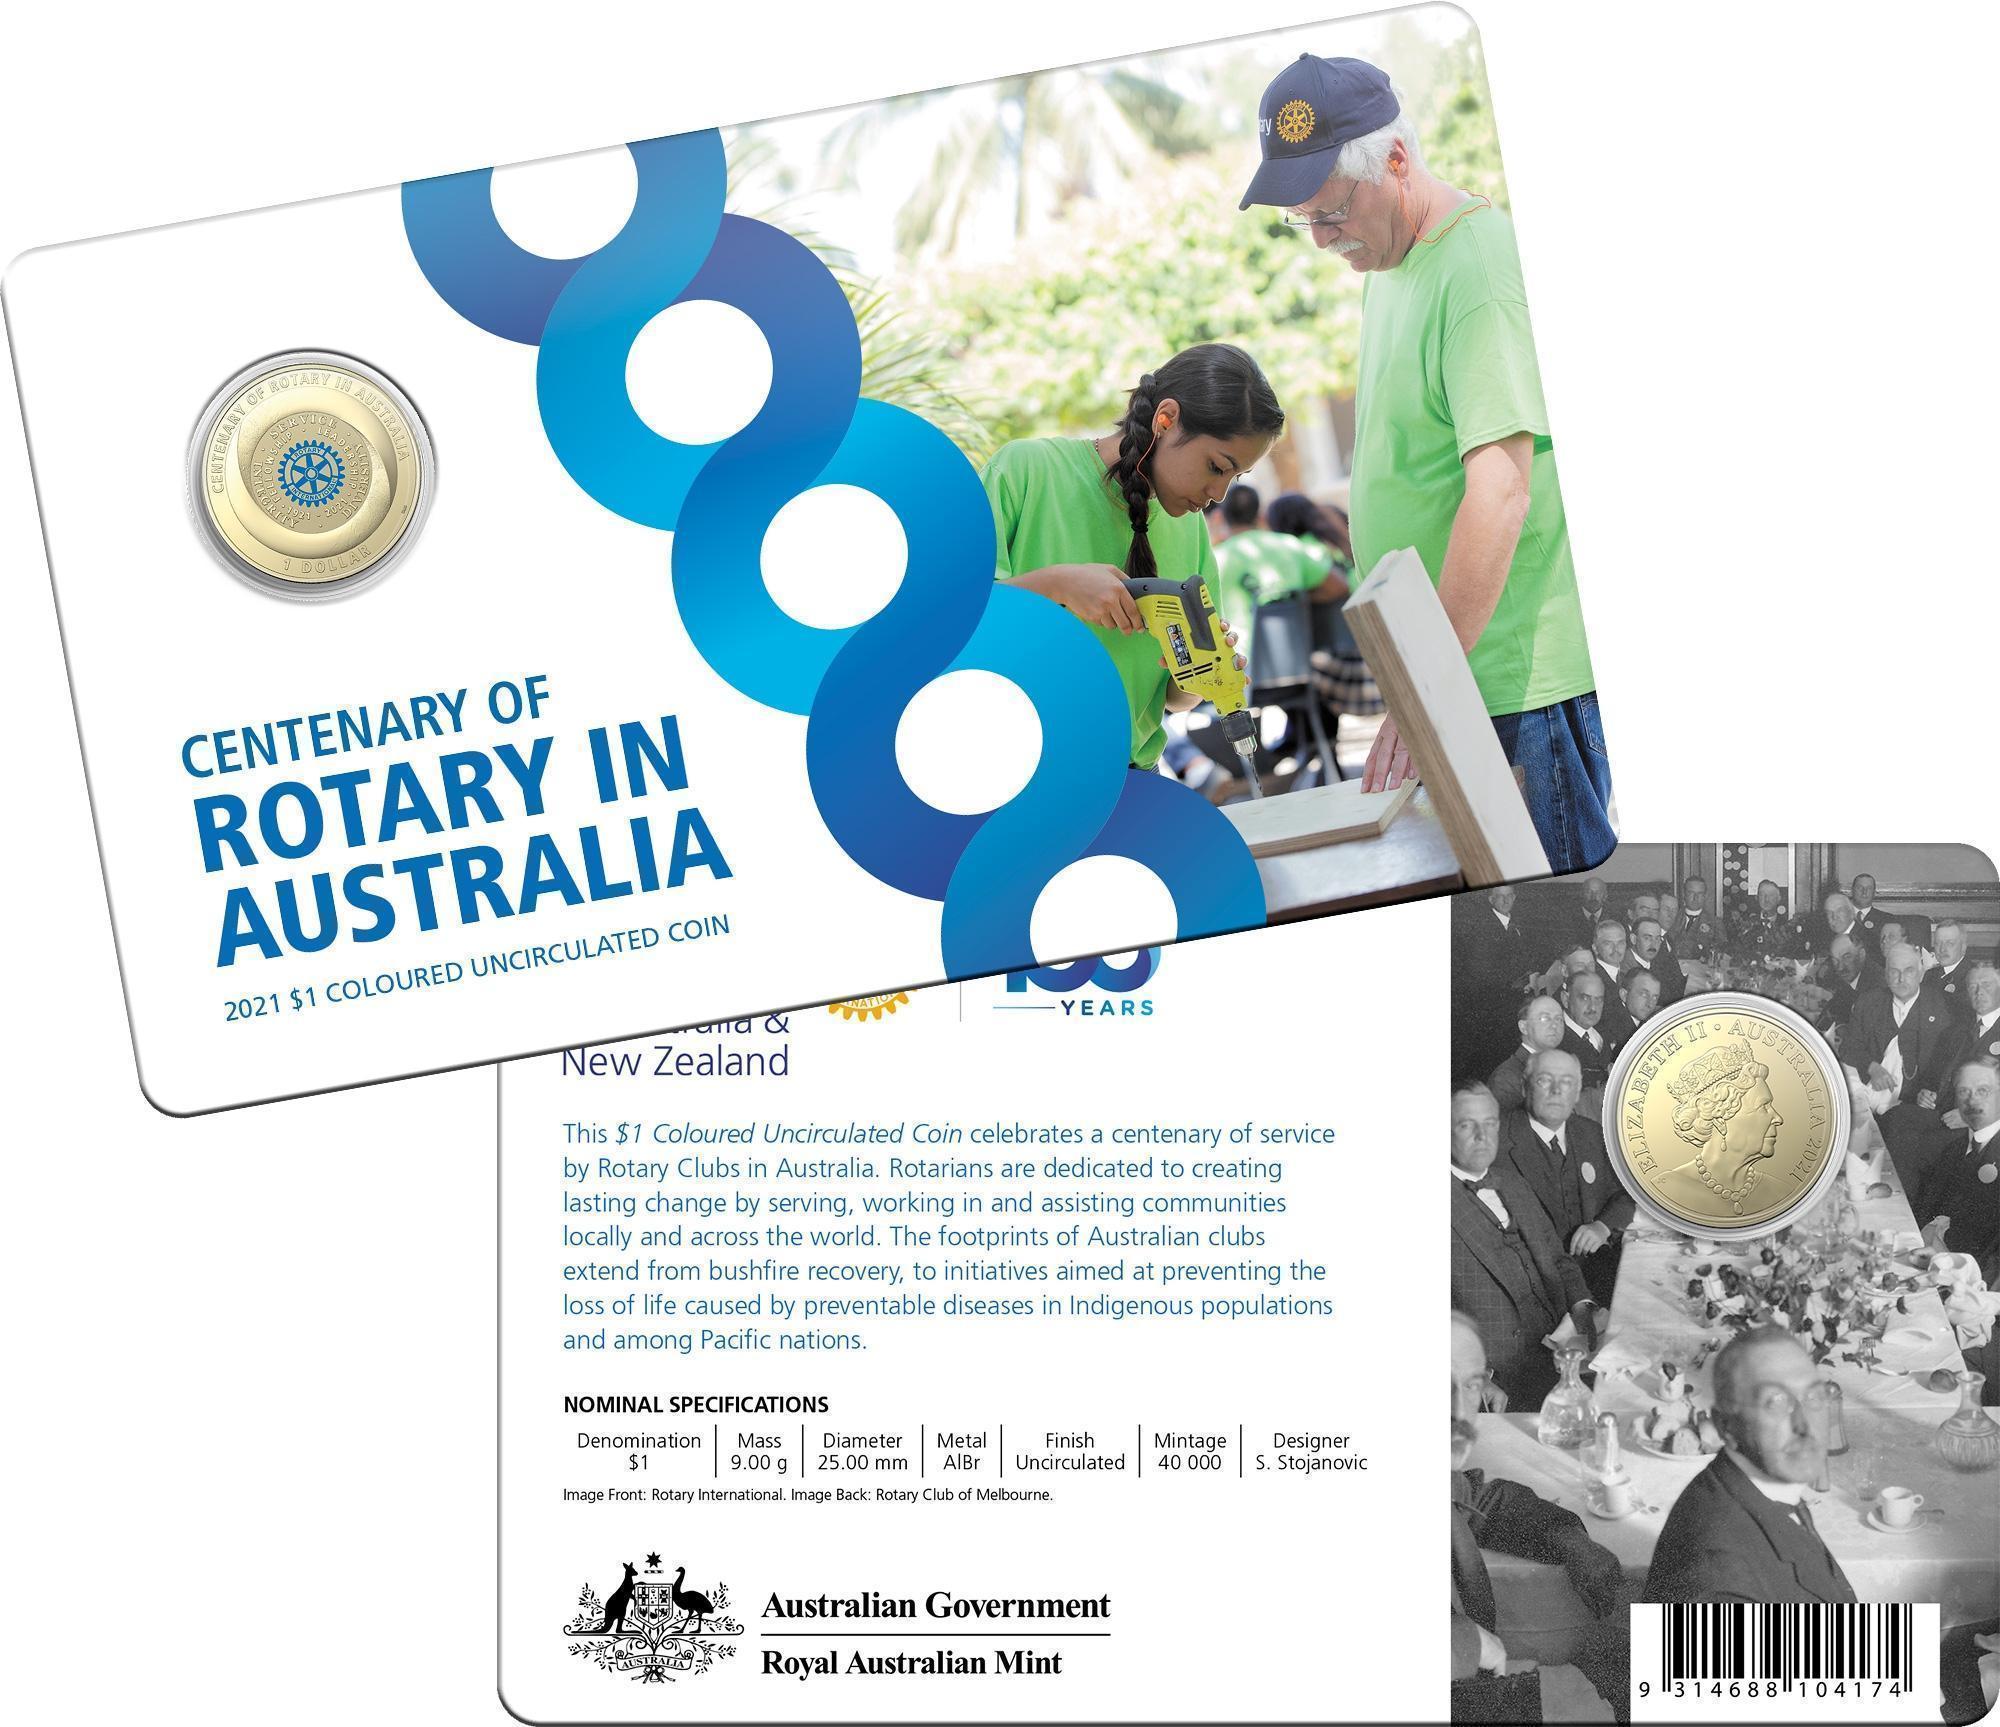 2021 Centenary of Rotary in Australia $1 Coloured Uncirculated Coin on Card RAM **LIMIT 2 PER HOUSEHOLD**